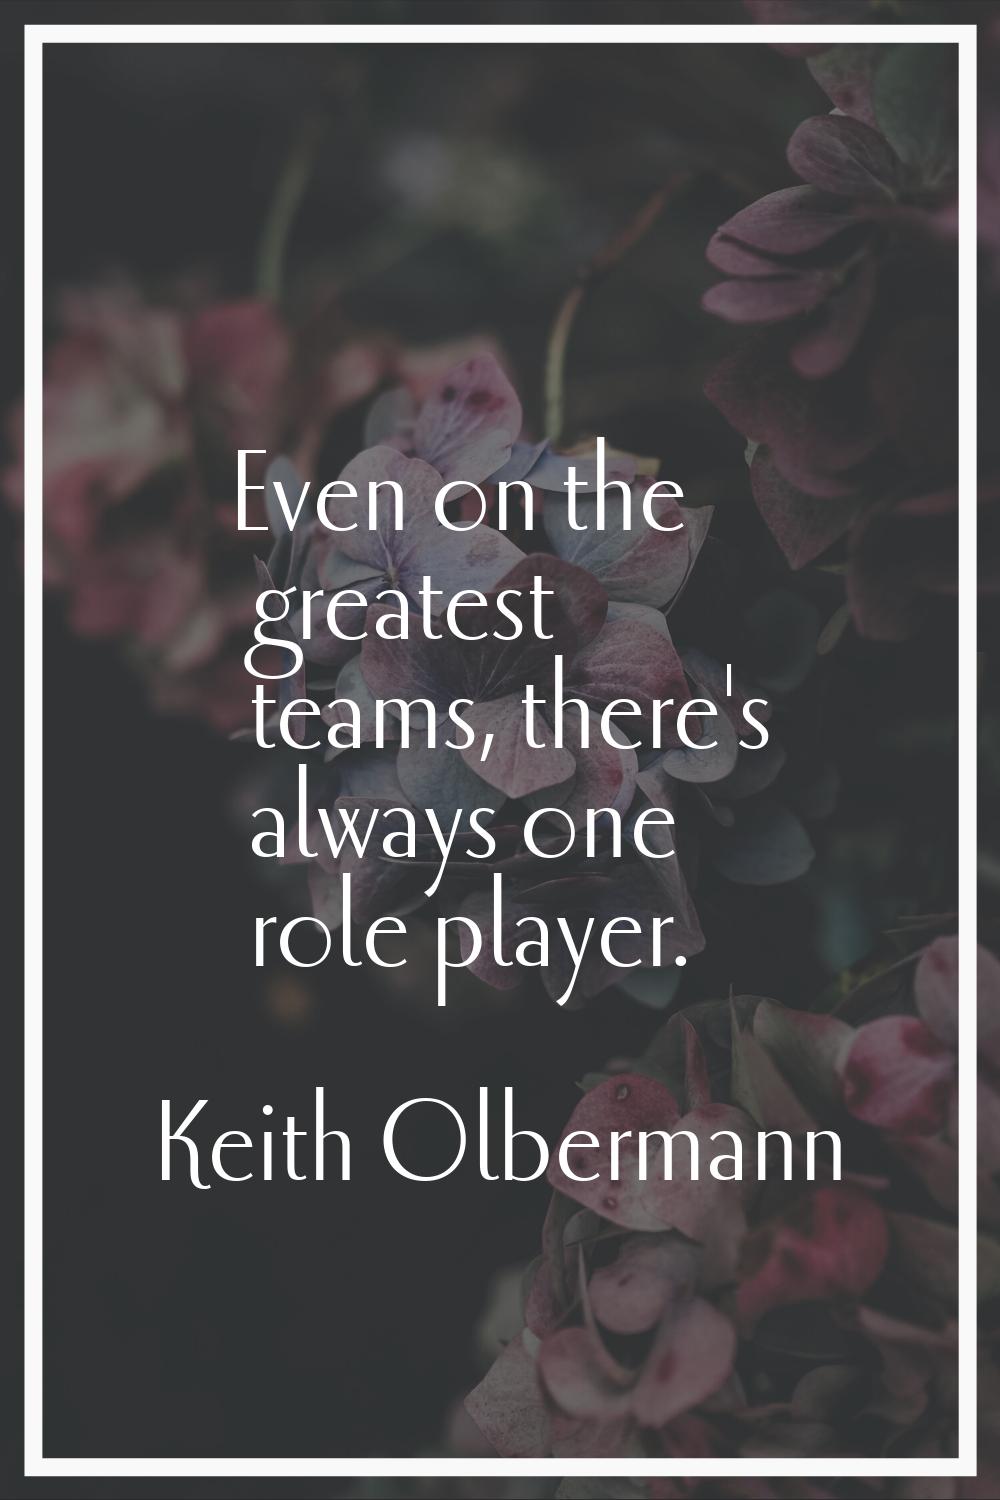 Even on the greatest teams, there's always one role player.